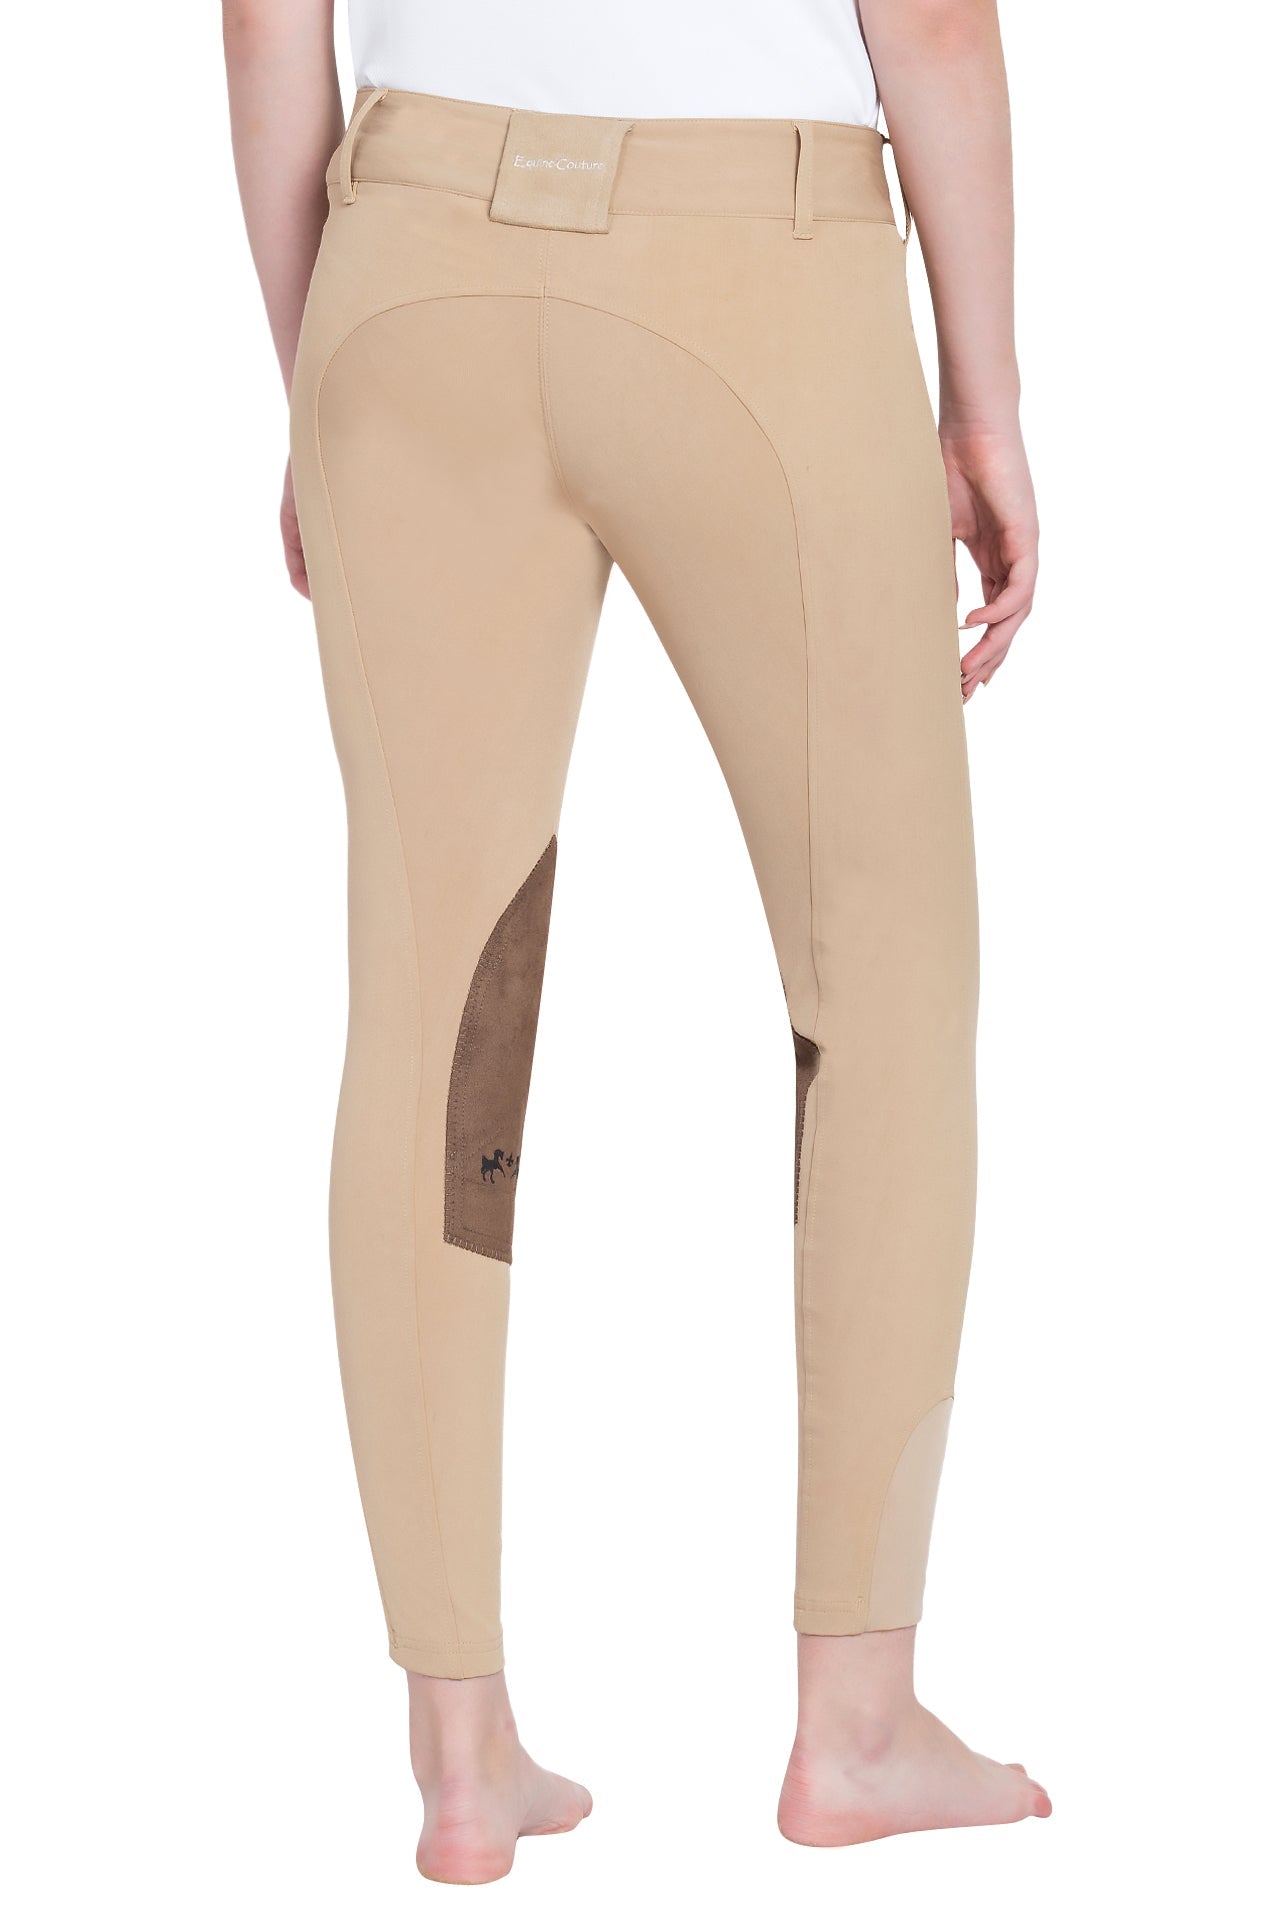 Equine Couture Ladies Coolmax Champion Knee Patch Breeches - Breeches.com